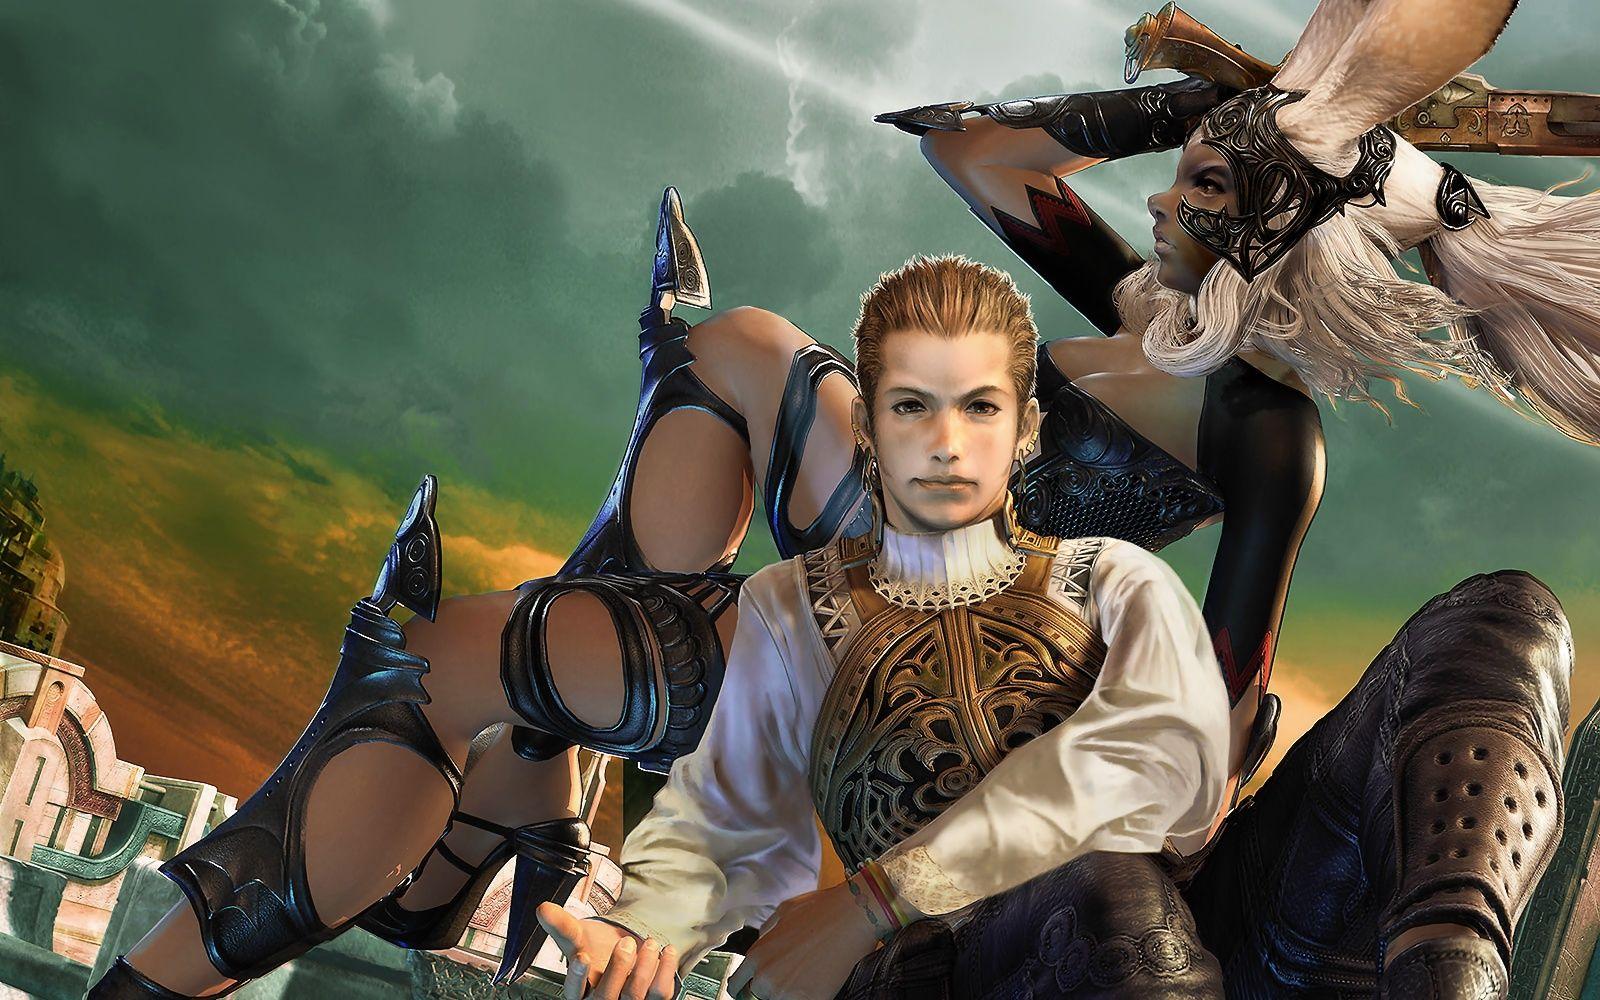 Final Fantasy XII: The Zodiac Age Western Release Date Set for July